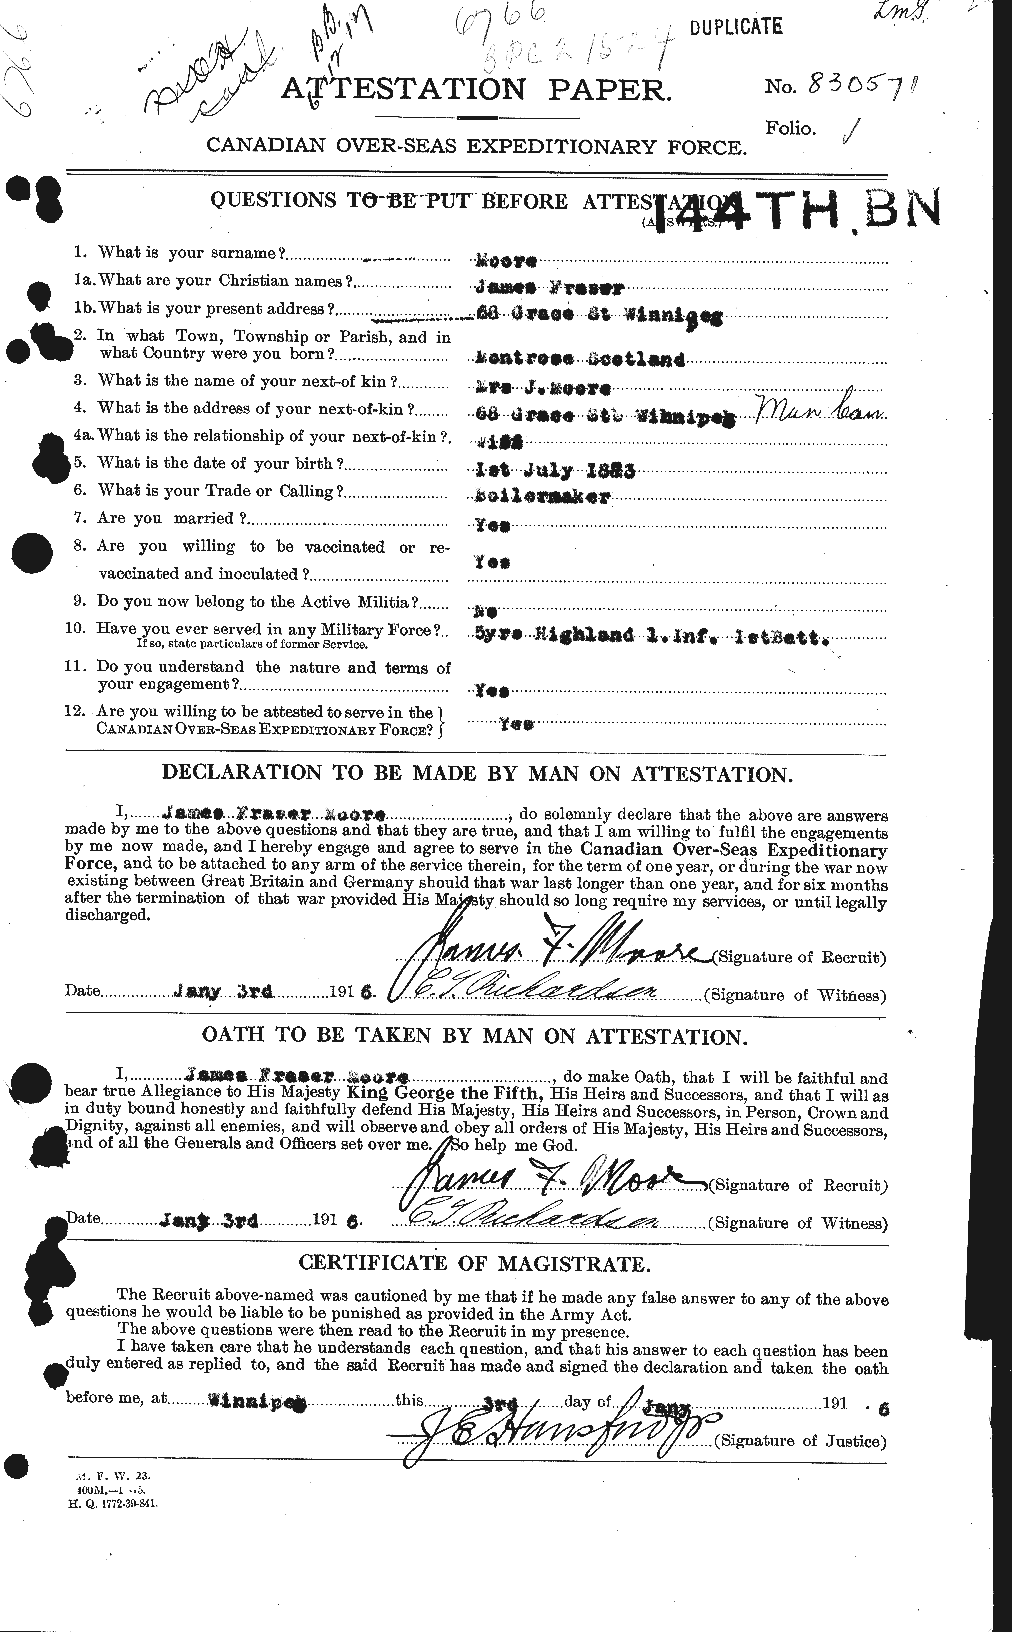 Personnel Records of the First World War - CEF 502219a